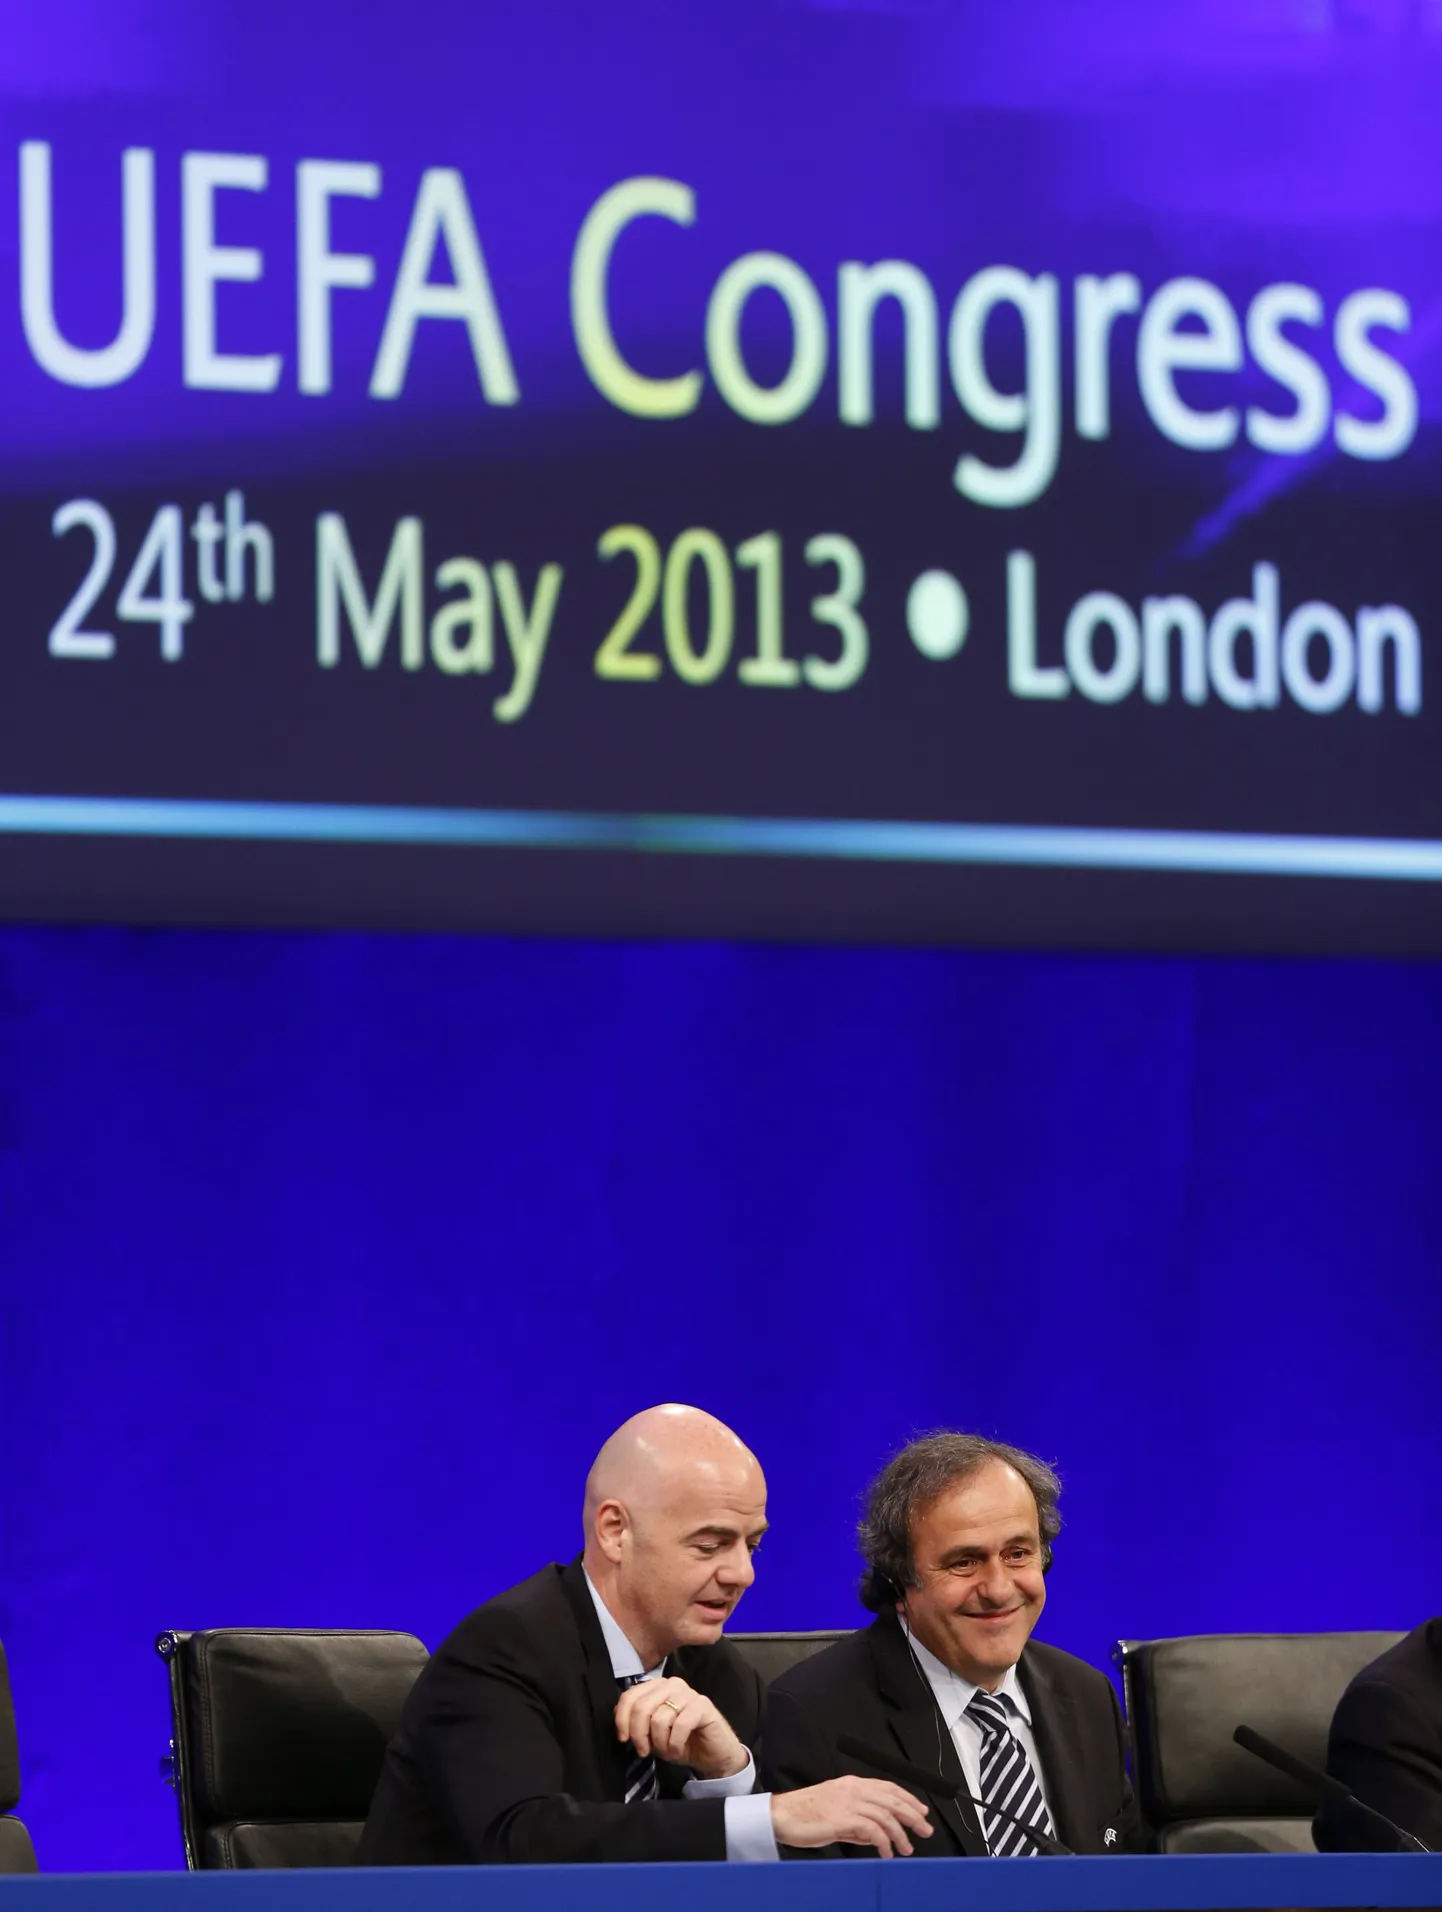 UEFA President Michel Platini, right, and UEFA General Secrtary Gianni Infantino speak to members of the media at the end of the 37th Ordinary UEFA Congress in London, Friday, May 24, 2013. (AP Photo/Sang Tan) / SCANPIX Code: 436